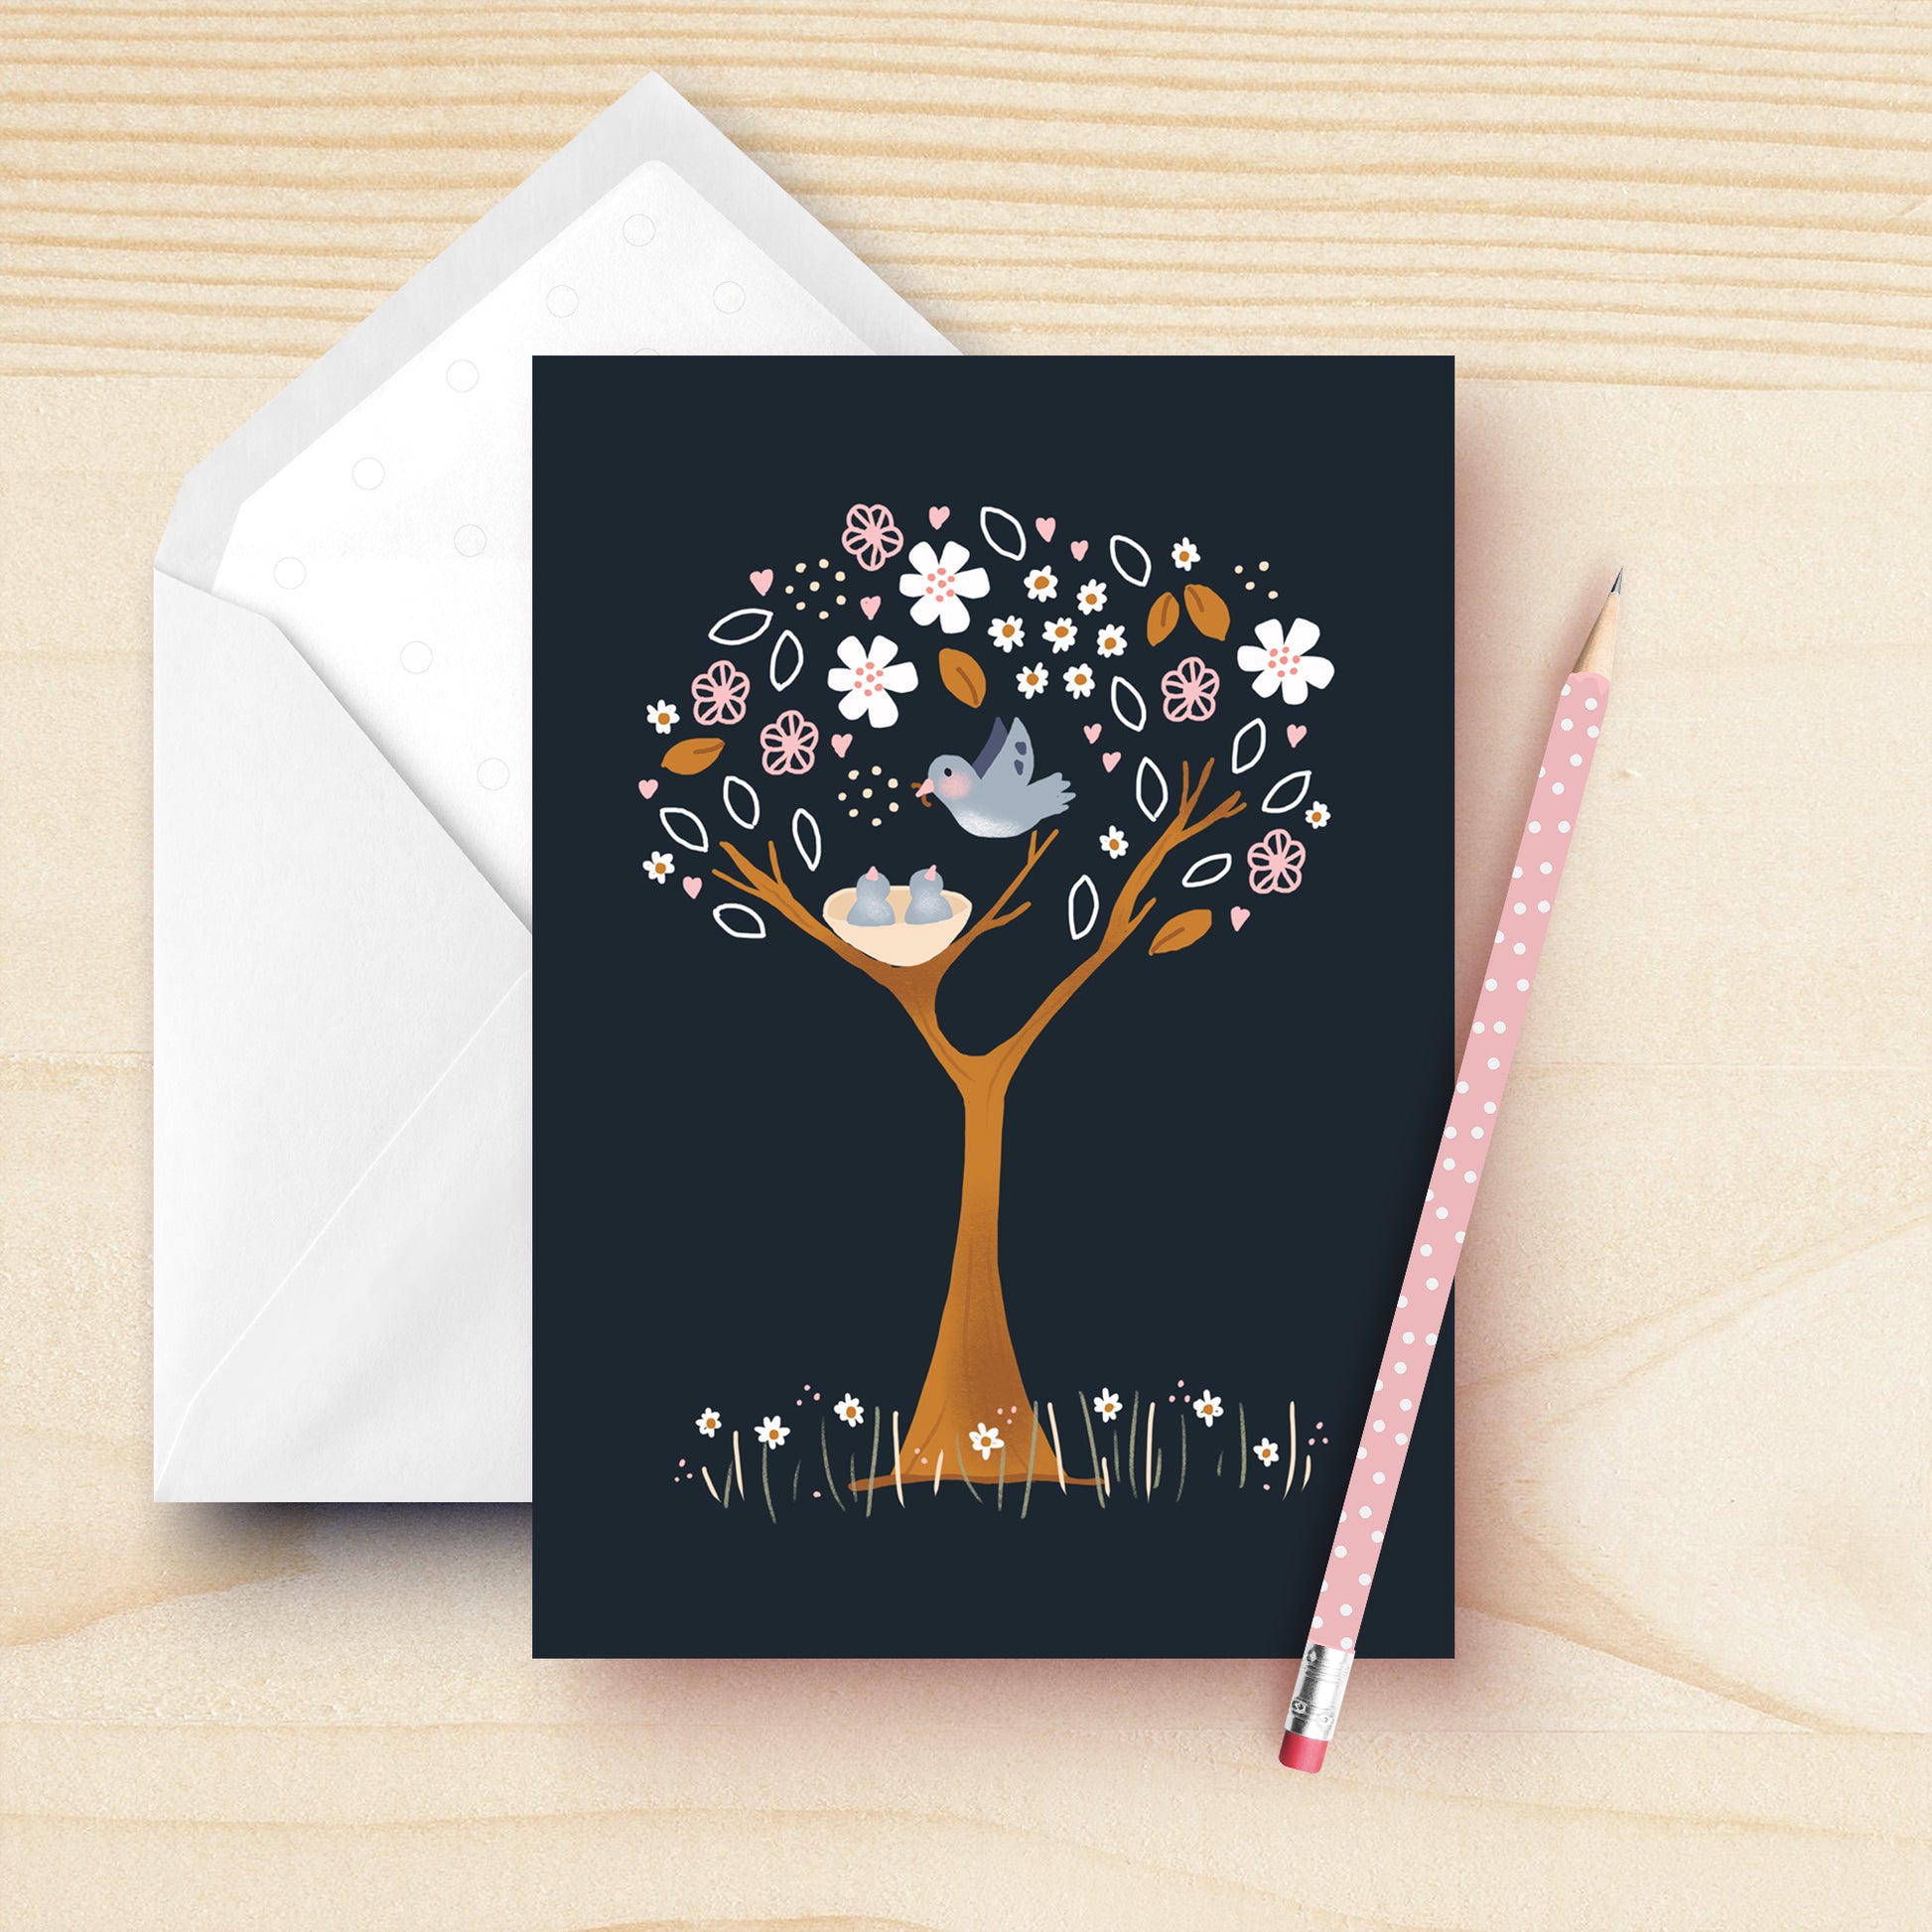 Blank greeting card geaturing a blue bird feeding it's young babies in the nes. The tree is a beautiful pink and white floral tree on a dark blue background. Hand drawn by Kathrin Legg